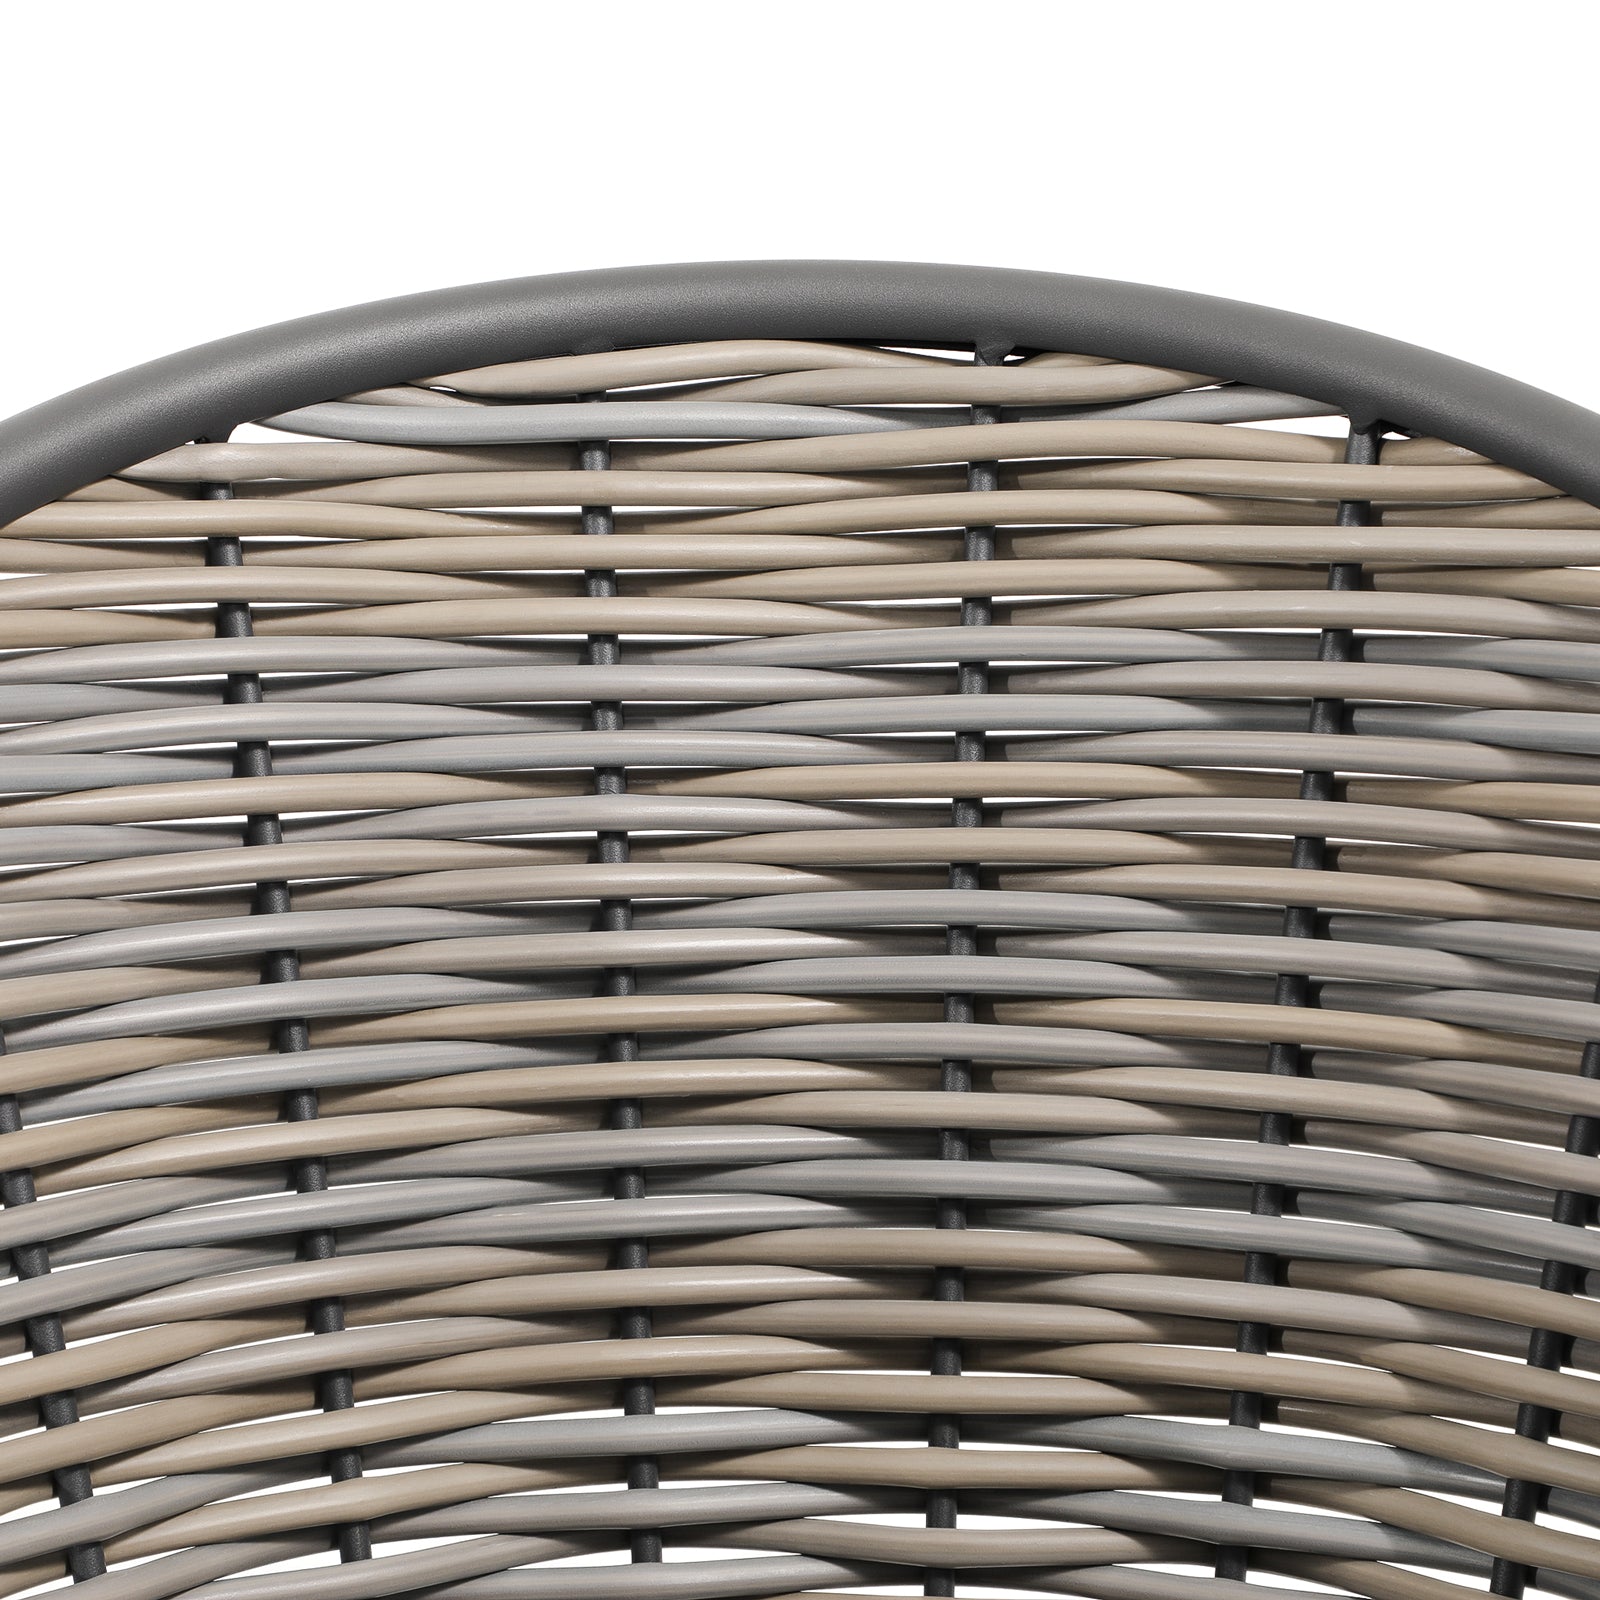 Burano Grey wicker Dining chair with two-colored rattan style, chair rattan close-up view - Jardina Furniture